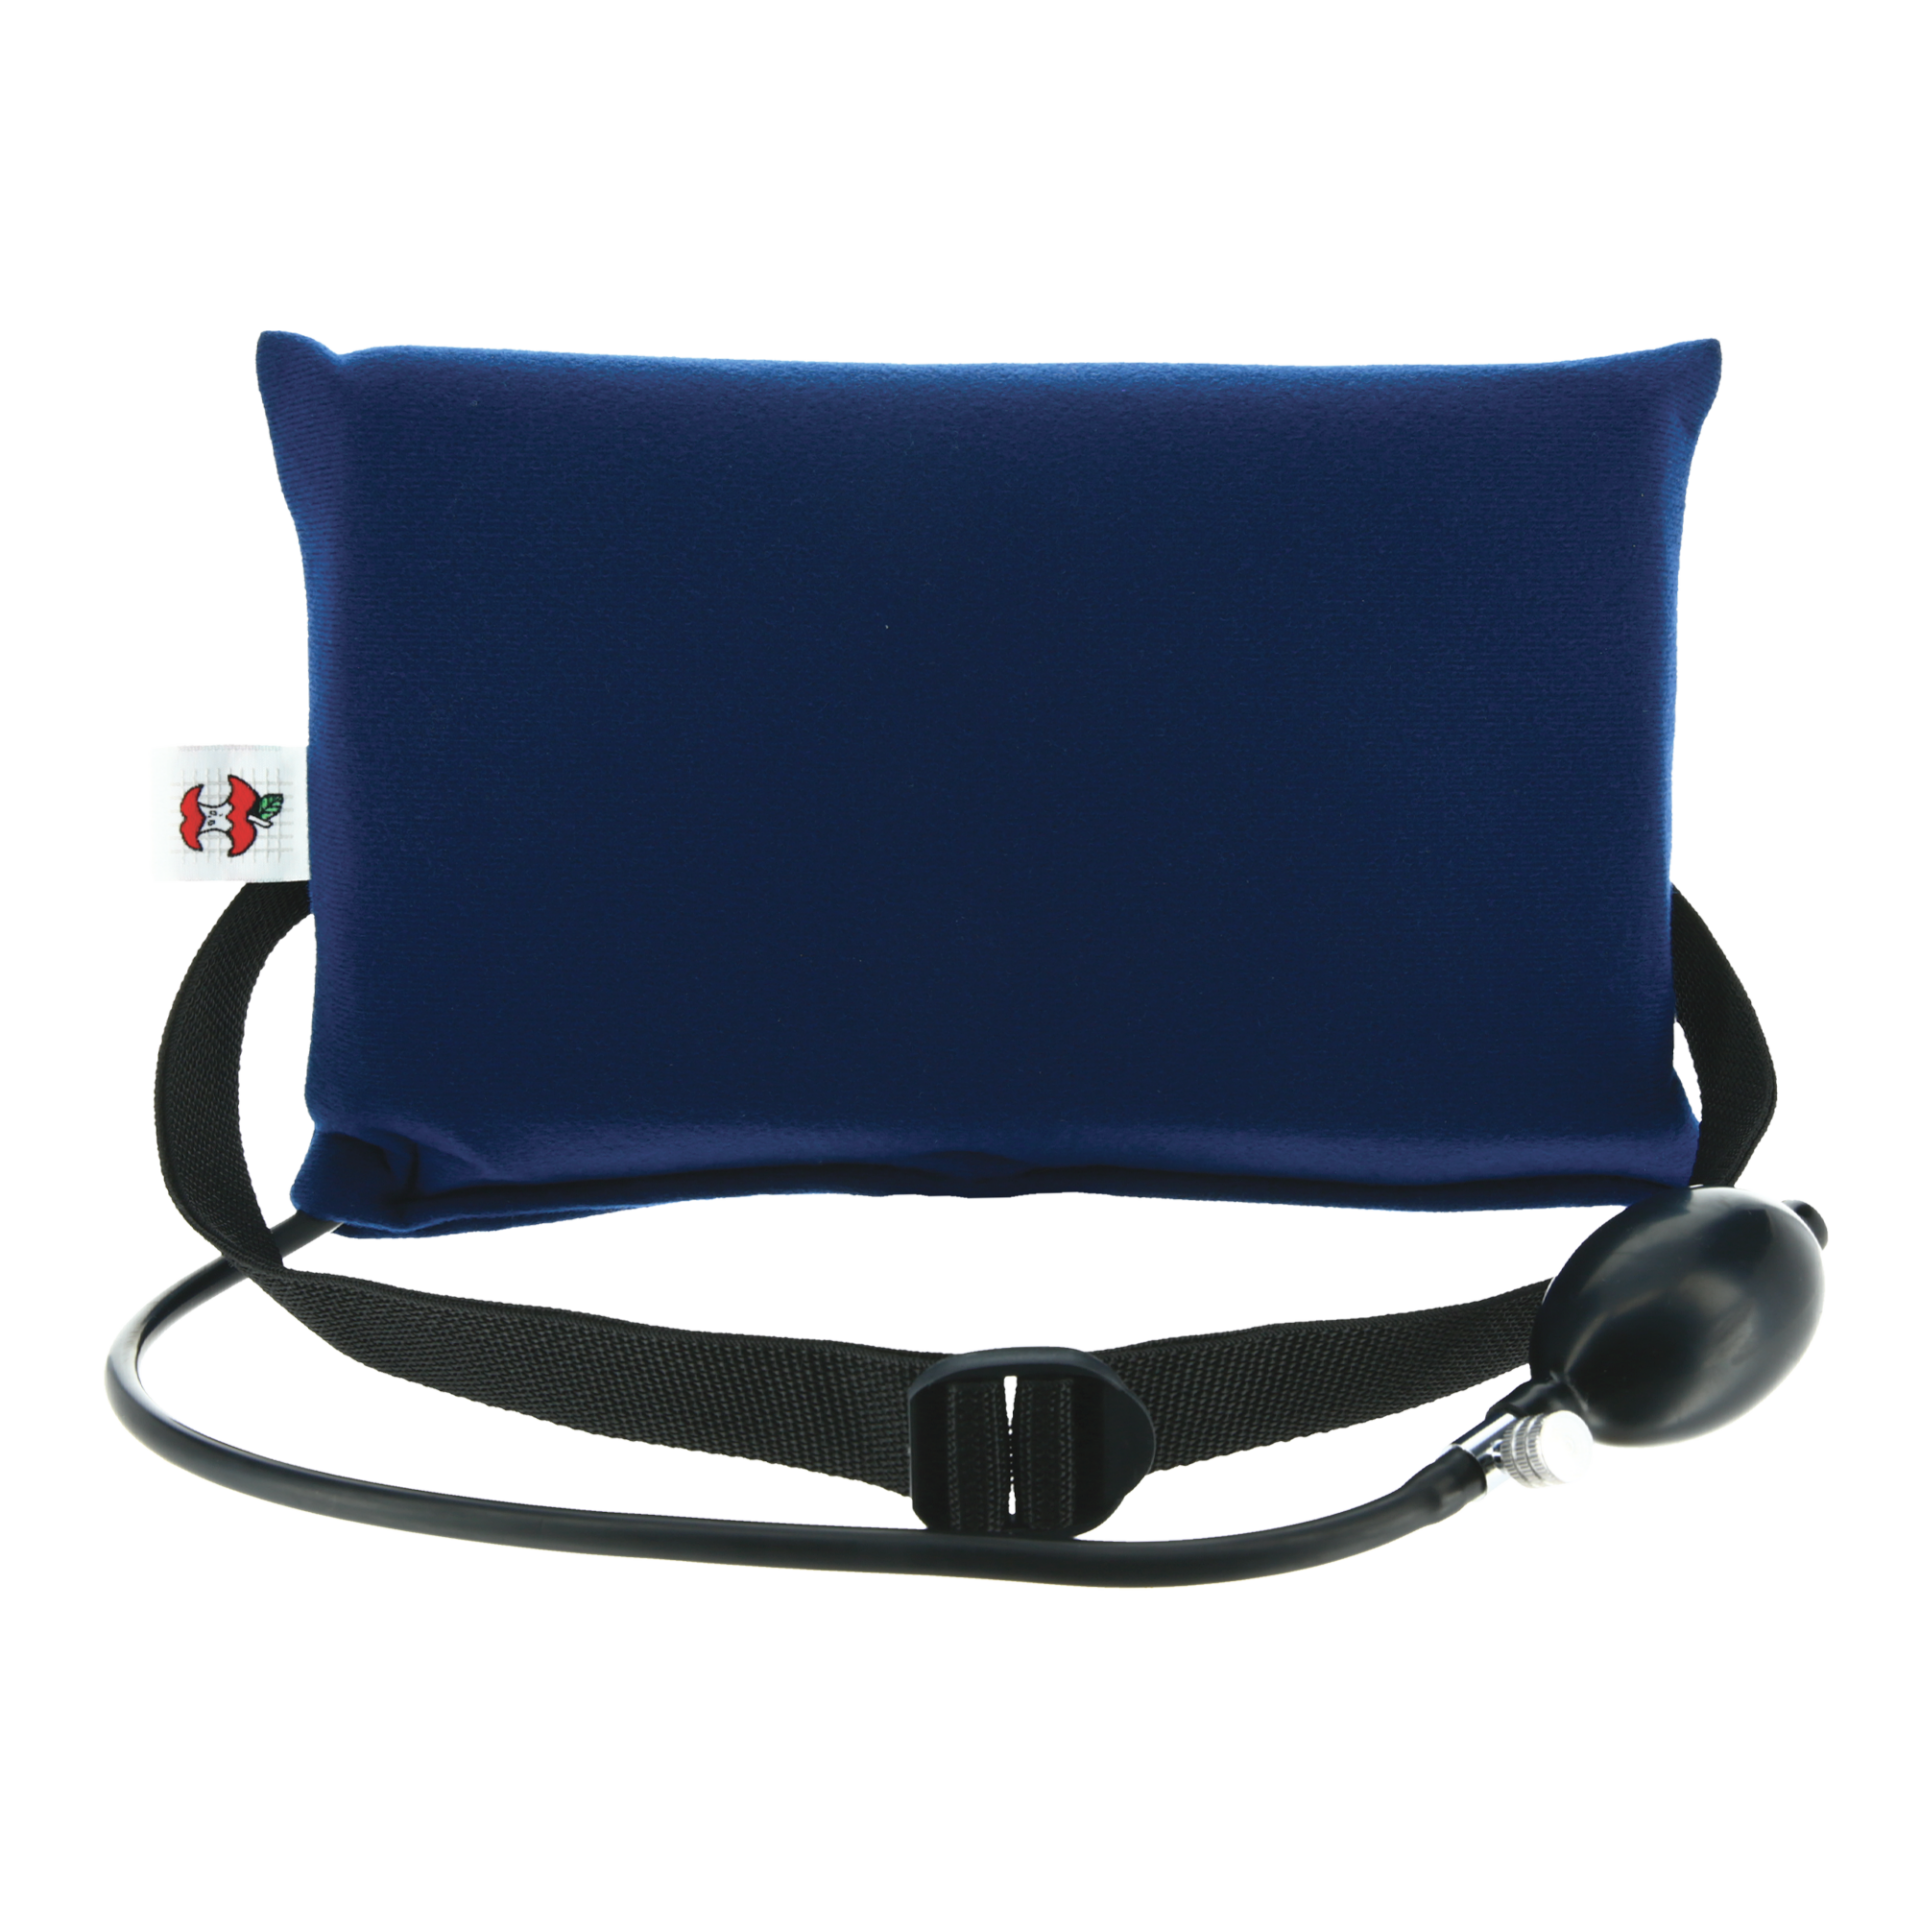 https://www.chiro1source.com/wp-content/uploads/2021/05/bak-460-bl-small-inflatable-lumbar-cushion-blue-front-coreproducts_2000x2000_crop_center_958c0cdd-923d-4f1b-ba61-bad9052f4364.png